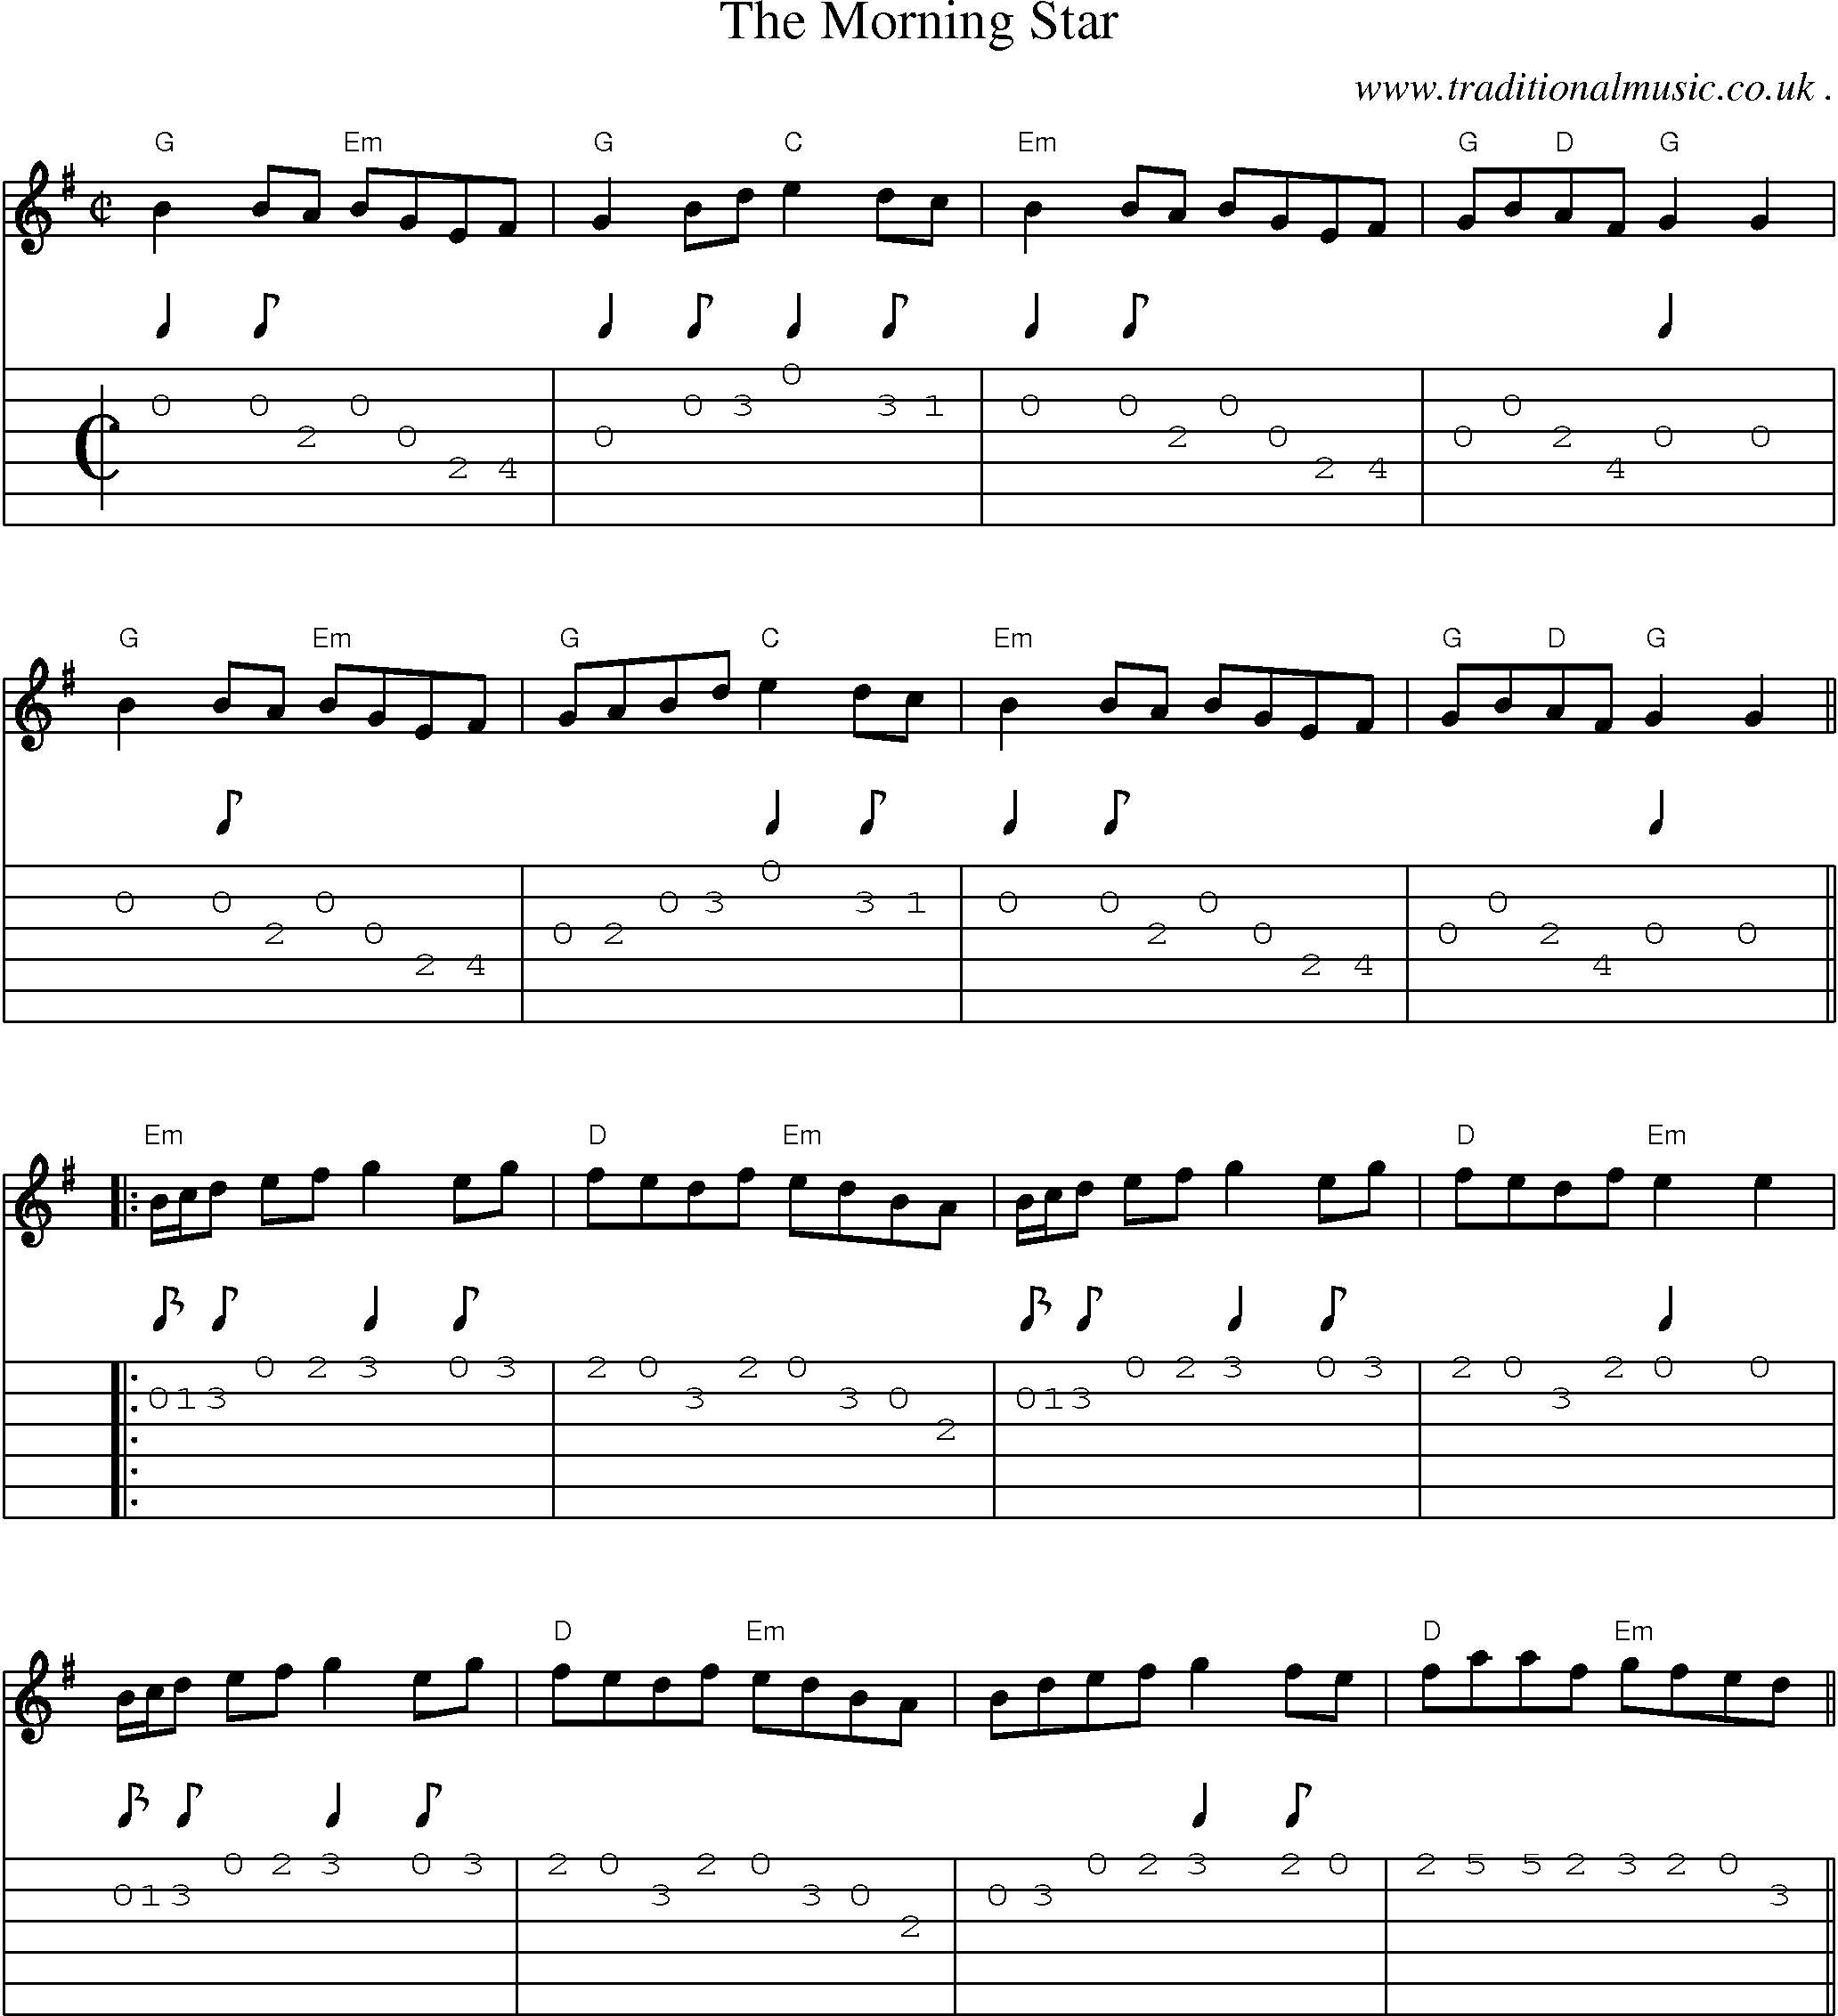 Music Score and Guitar Tabs for The Morning Star